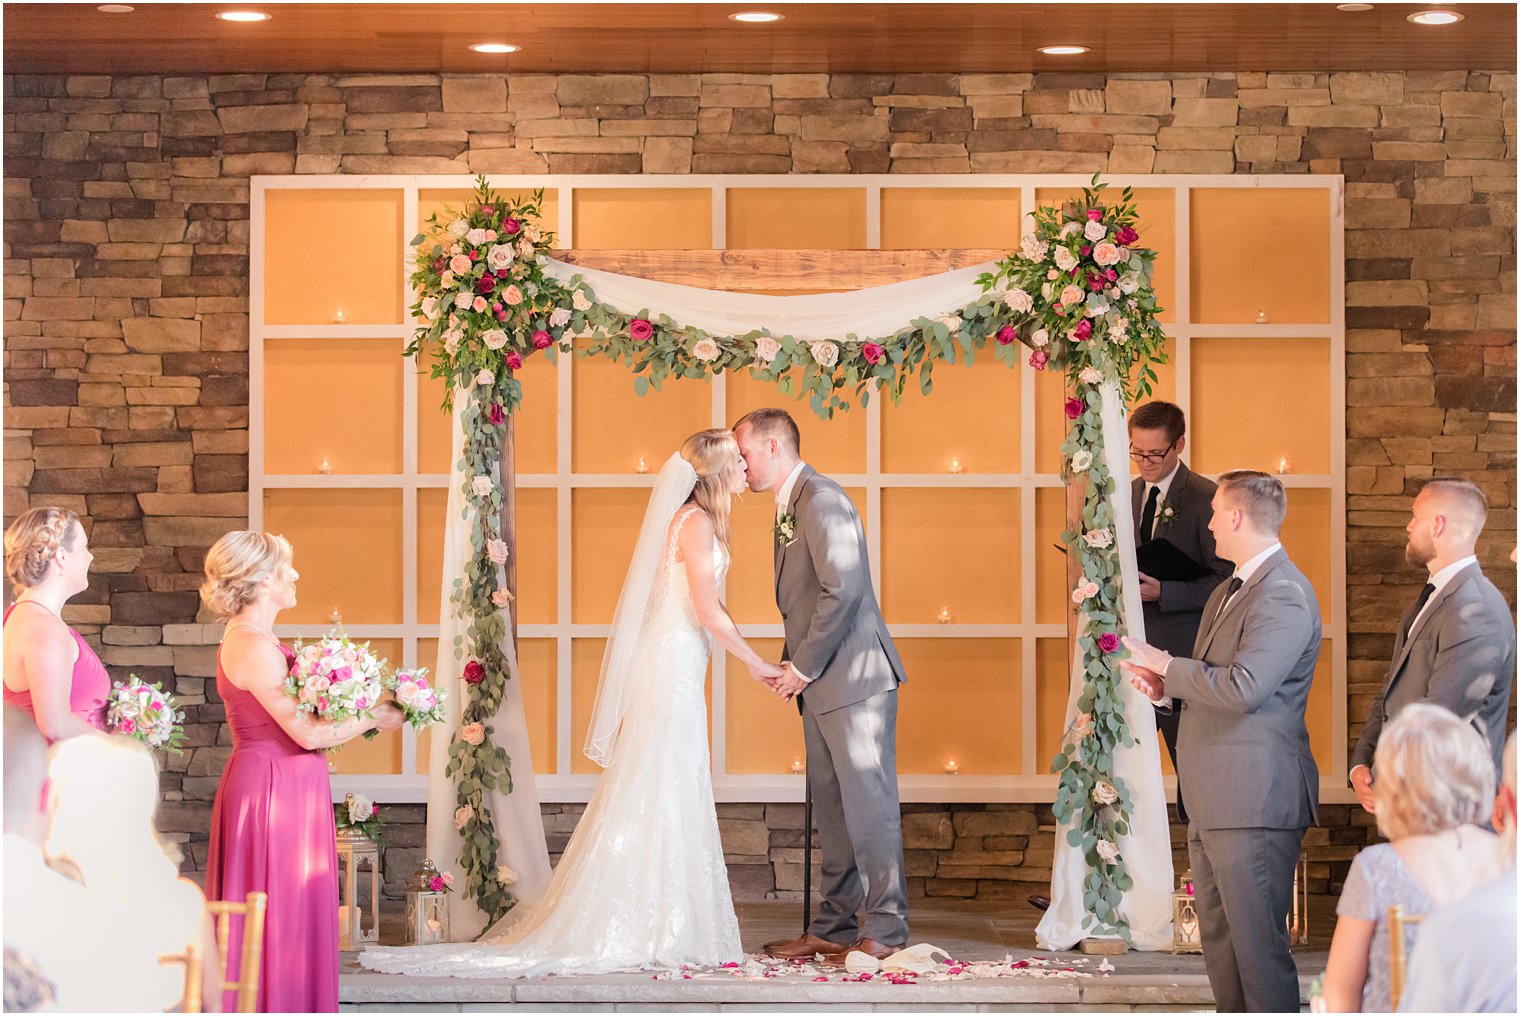 Wedding ceremony at Stone House at Stirling Ridge in Warren, NJ